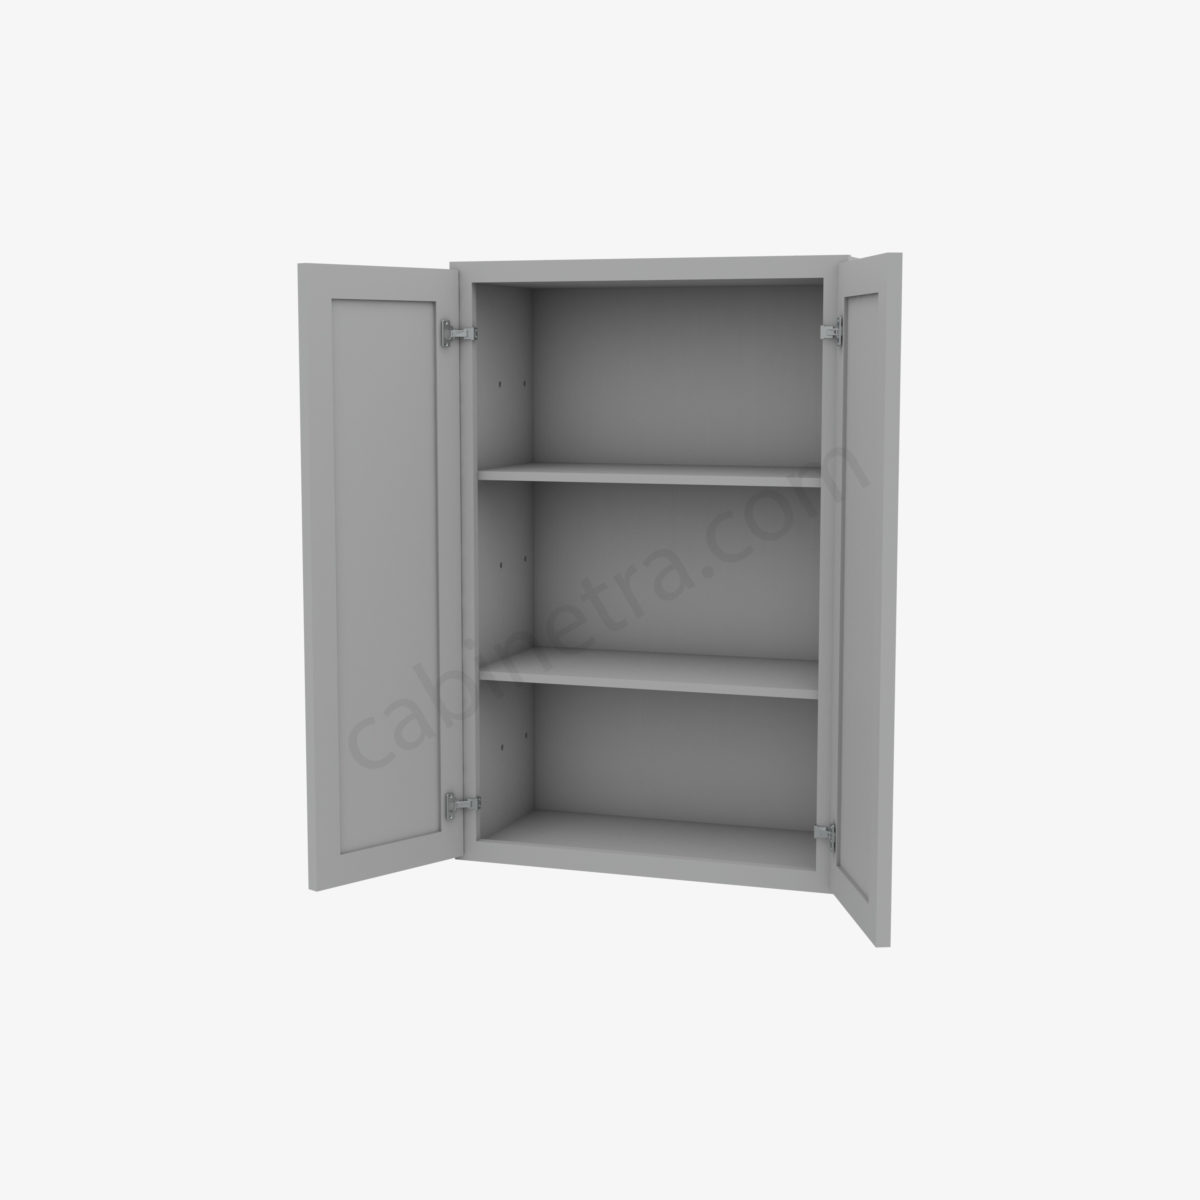 AB W2436B 5 Forevermark Lait Gray Shaker Cabinetra scaled